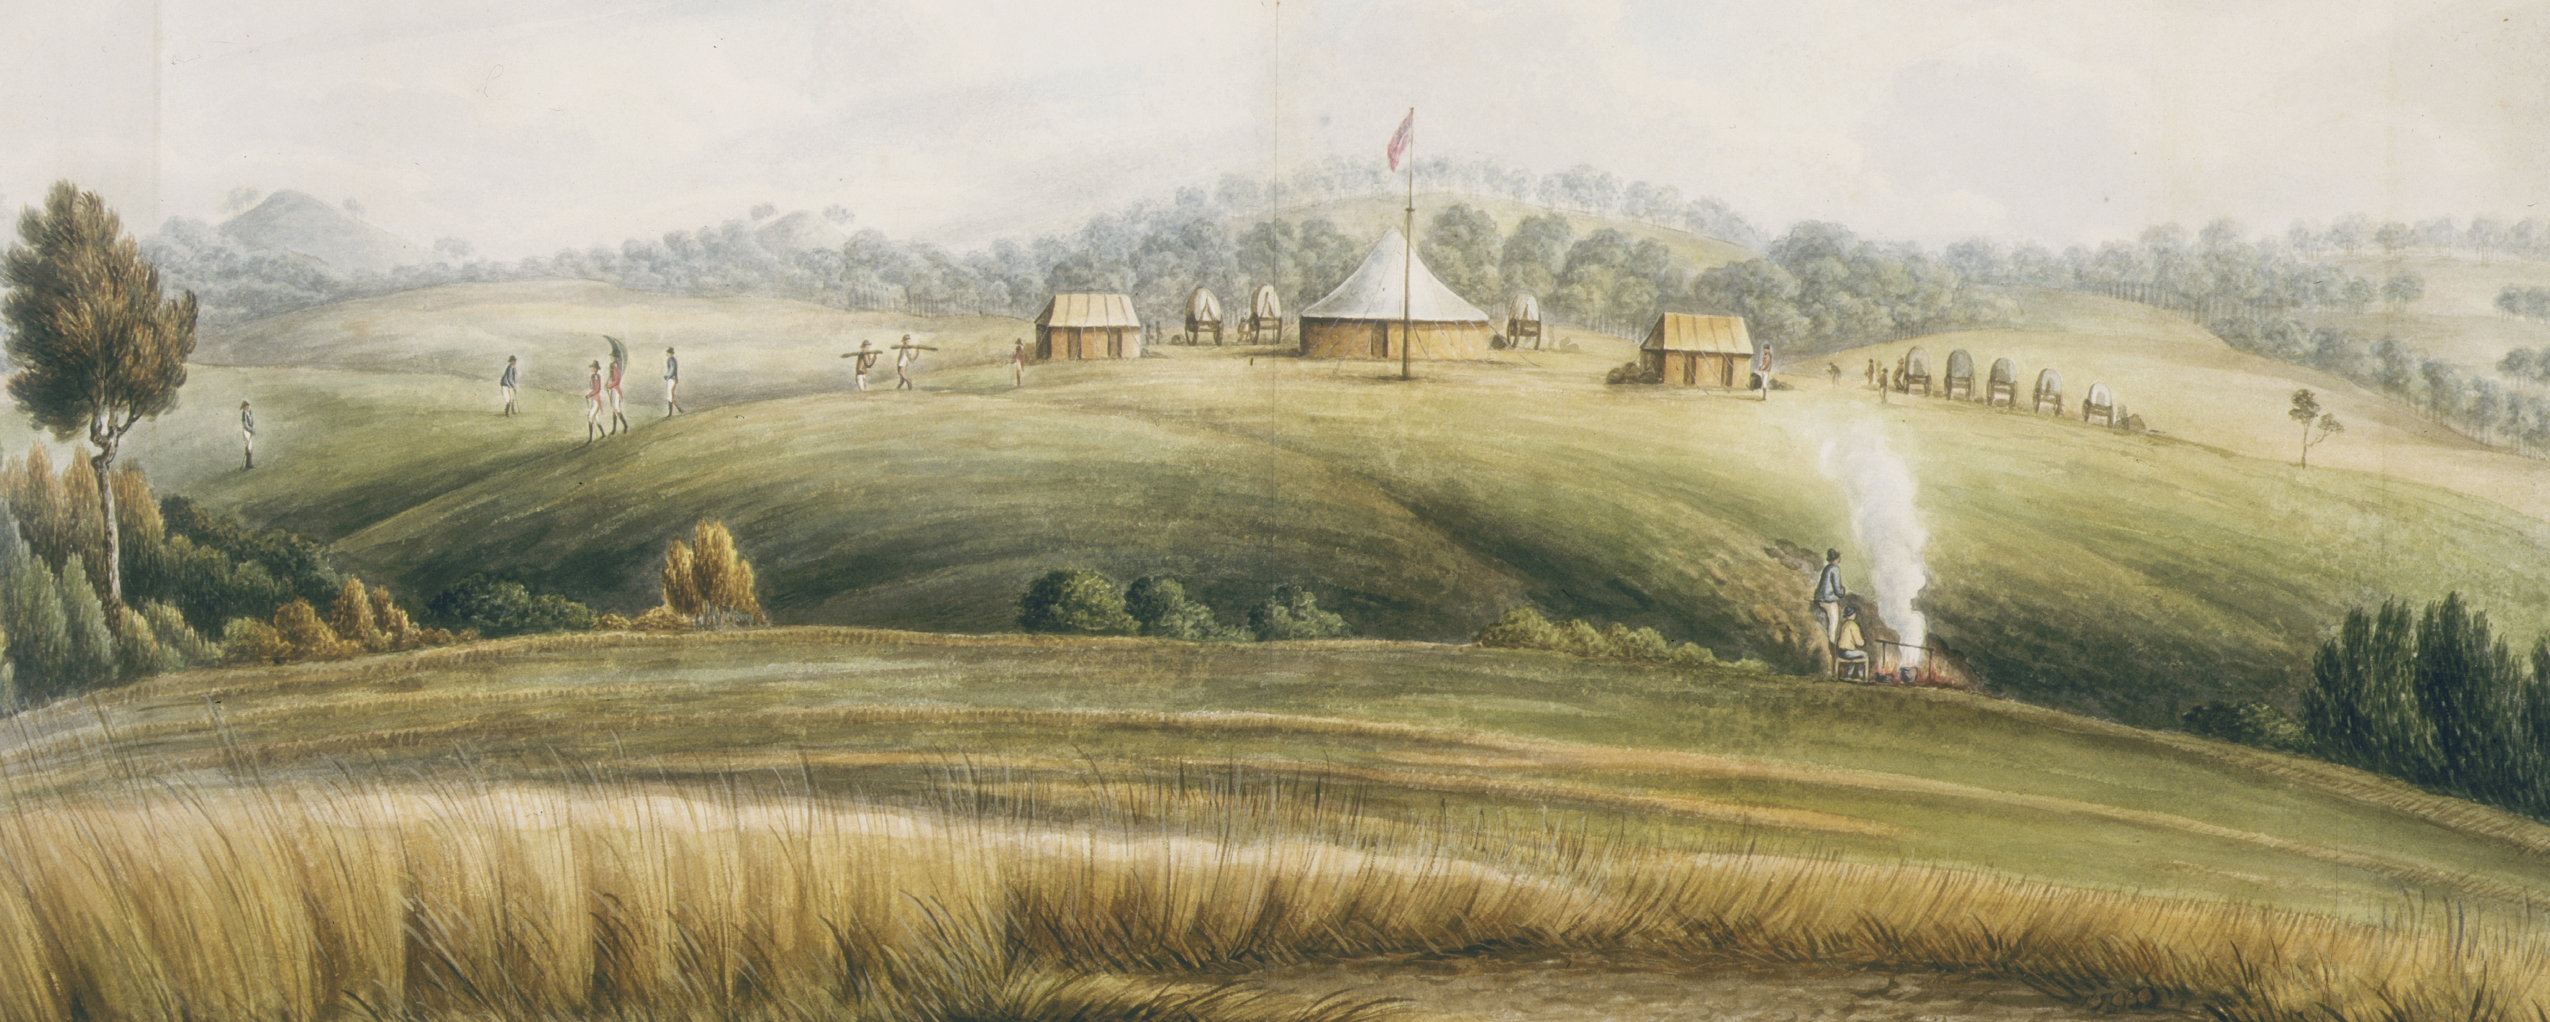 1815 - The Flagstaff on the Macquarie (Wambool) River Bank – John W. Lewin who travelled with Governor Macquarie to Bathurst